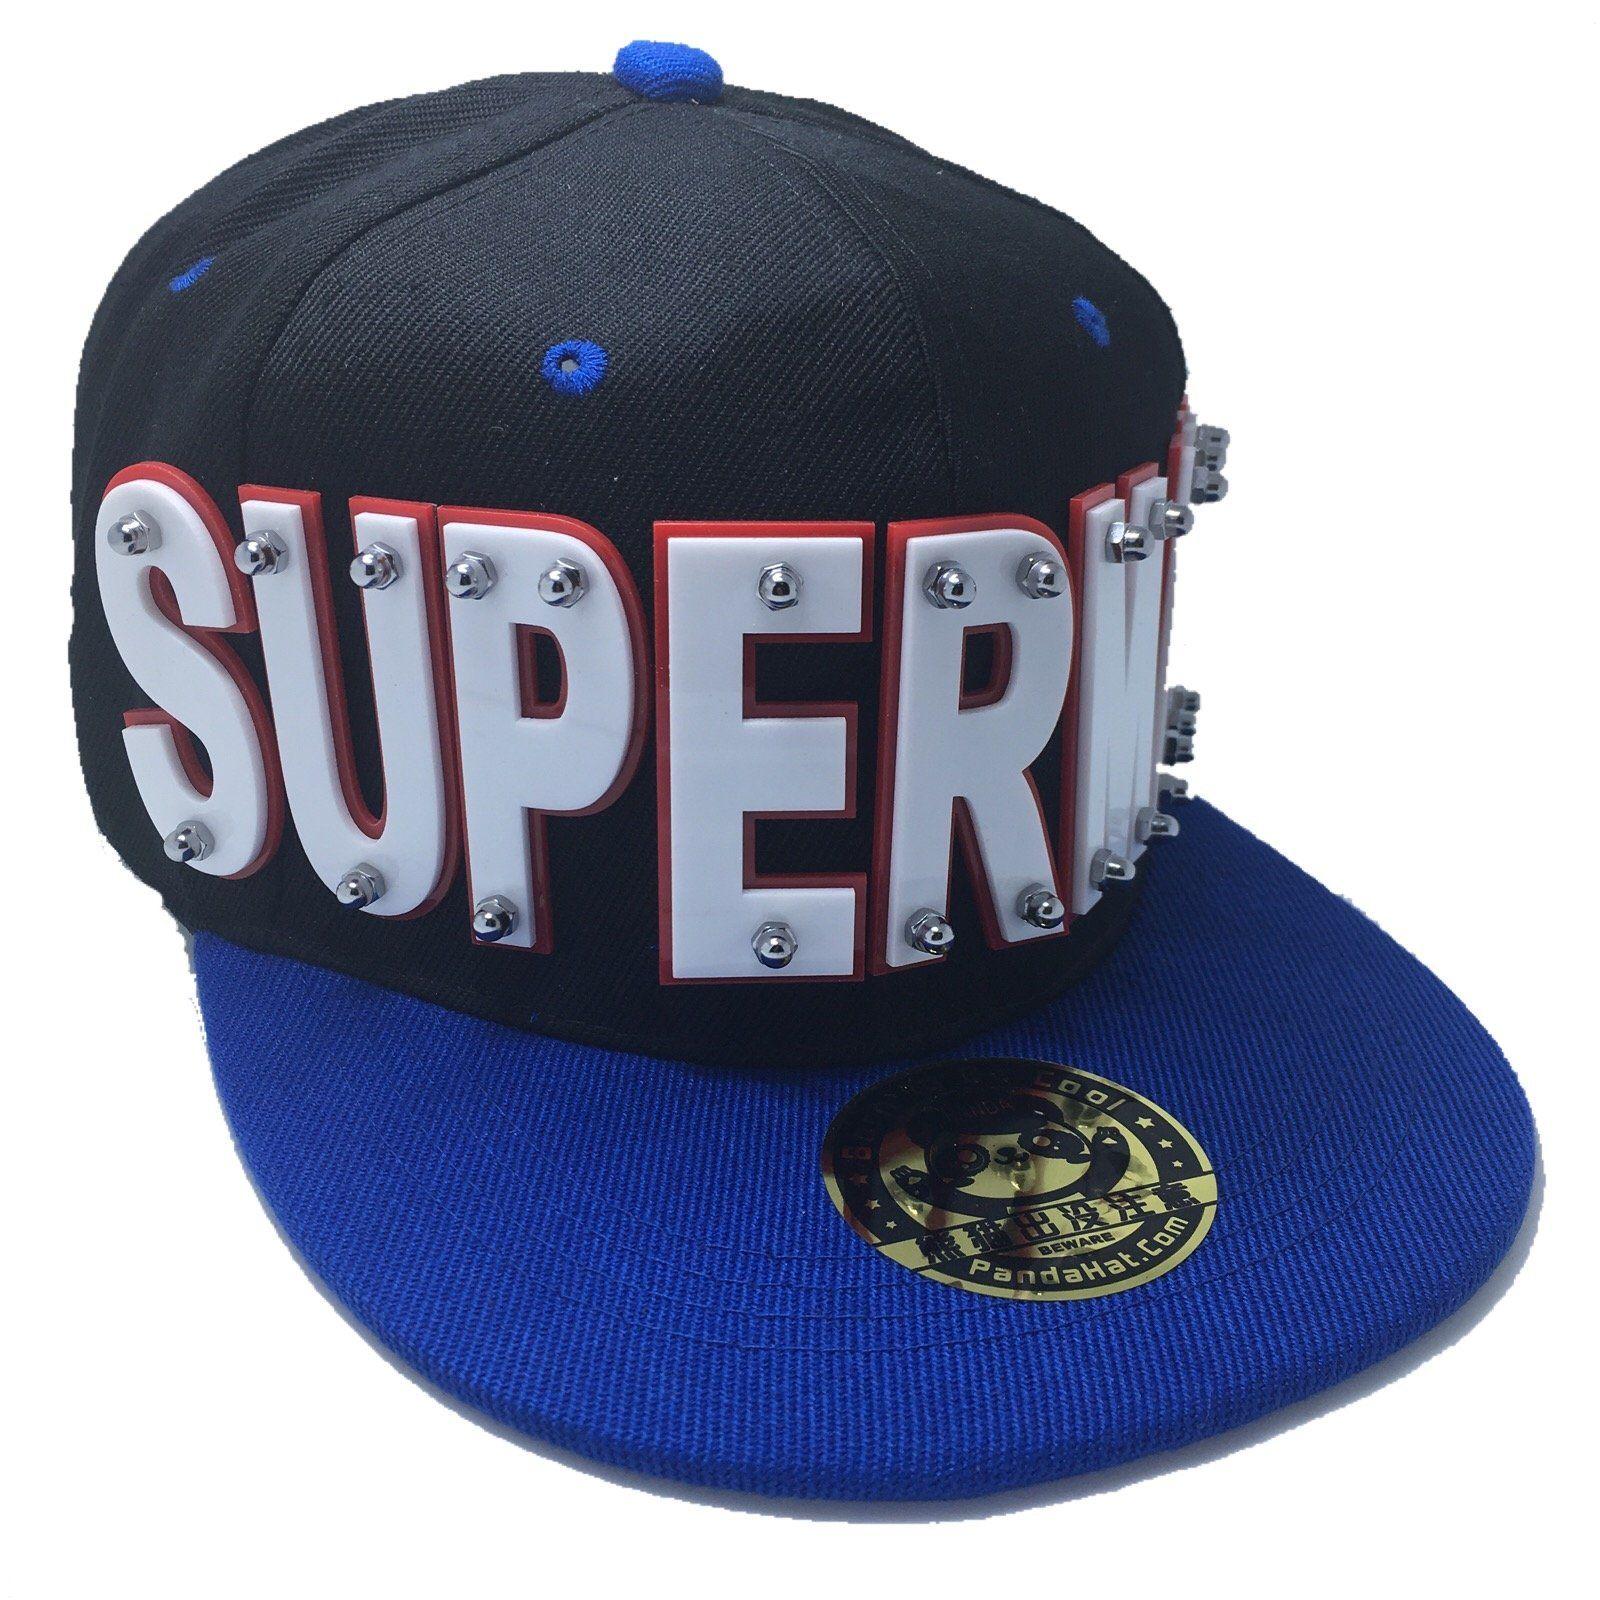 Blue and White Superman Logo - SUPERMAN HAT IN BLACK WITH BLUE BRIM - Pandahat